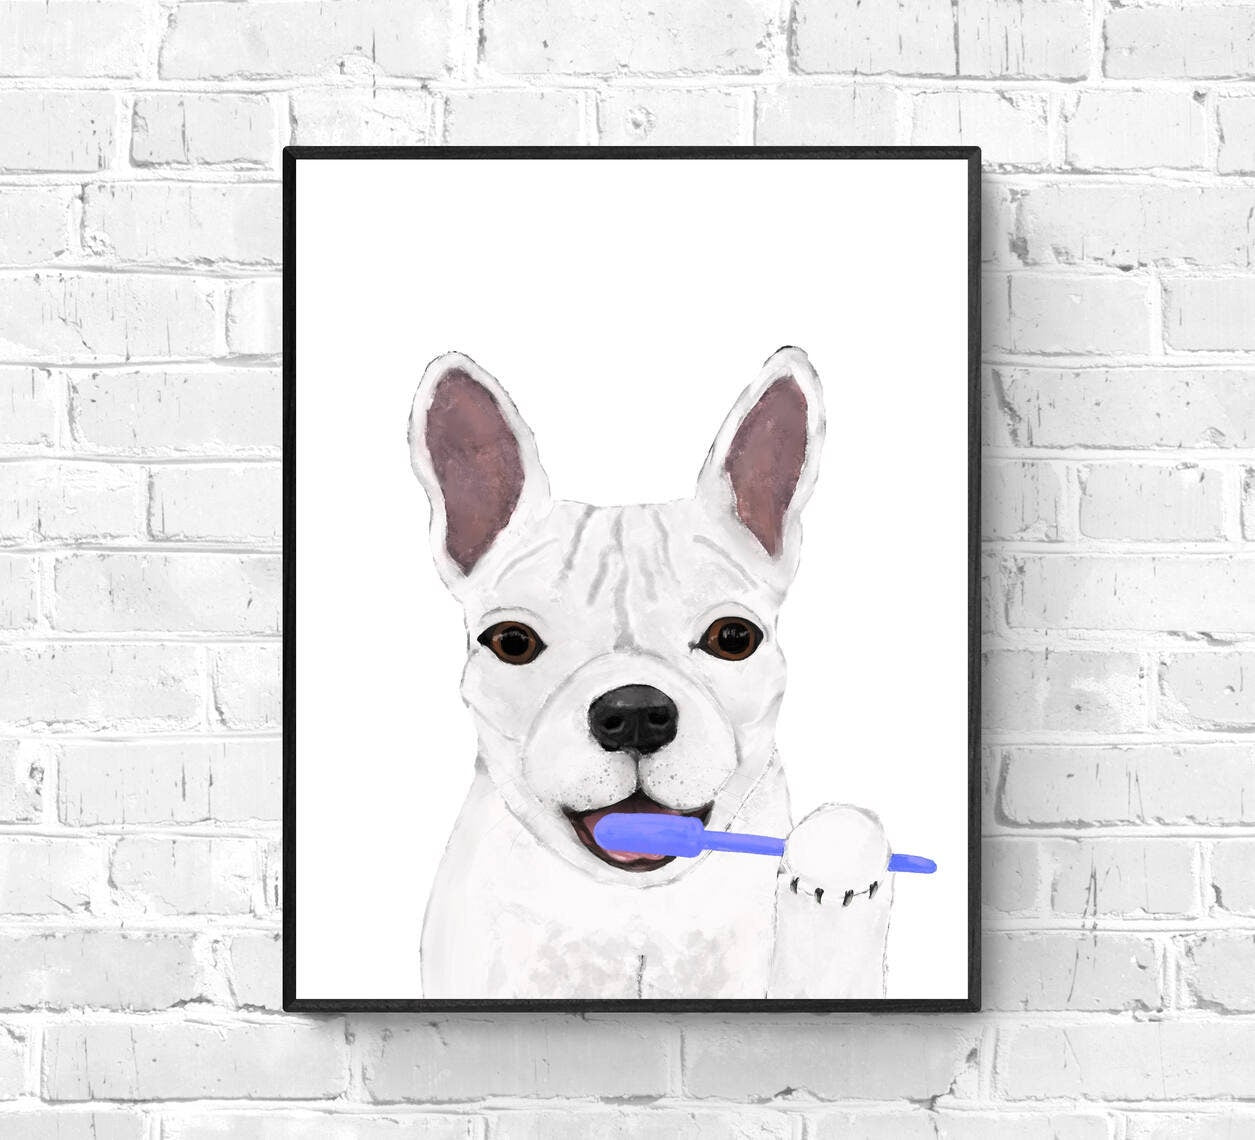 French Bulldog Brushing Teeth Print, White Frenchie with Toothbrush, Bathroom Wall Art, Dog Painting, Dog In Bath Illustration, Dog Lover